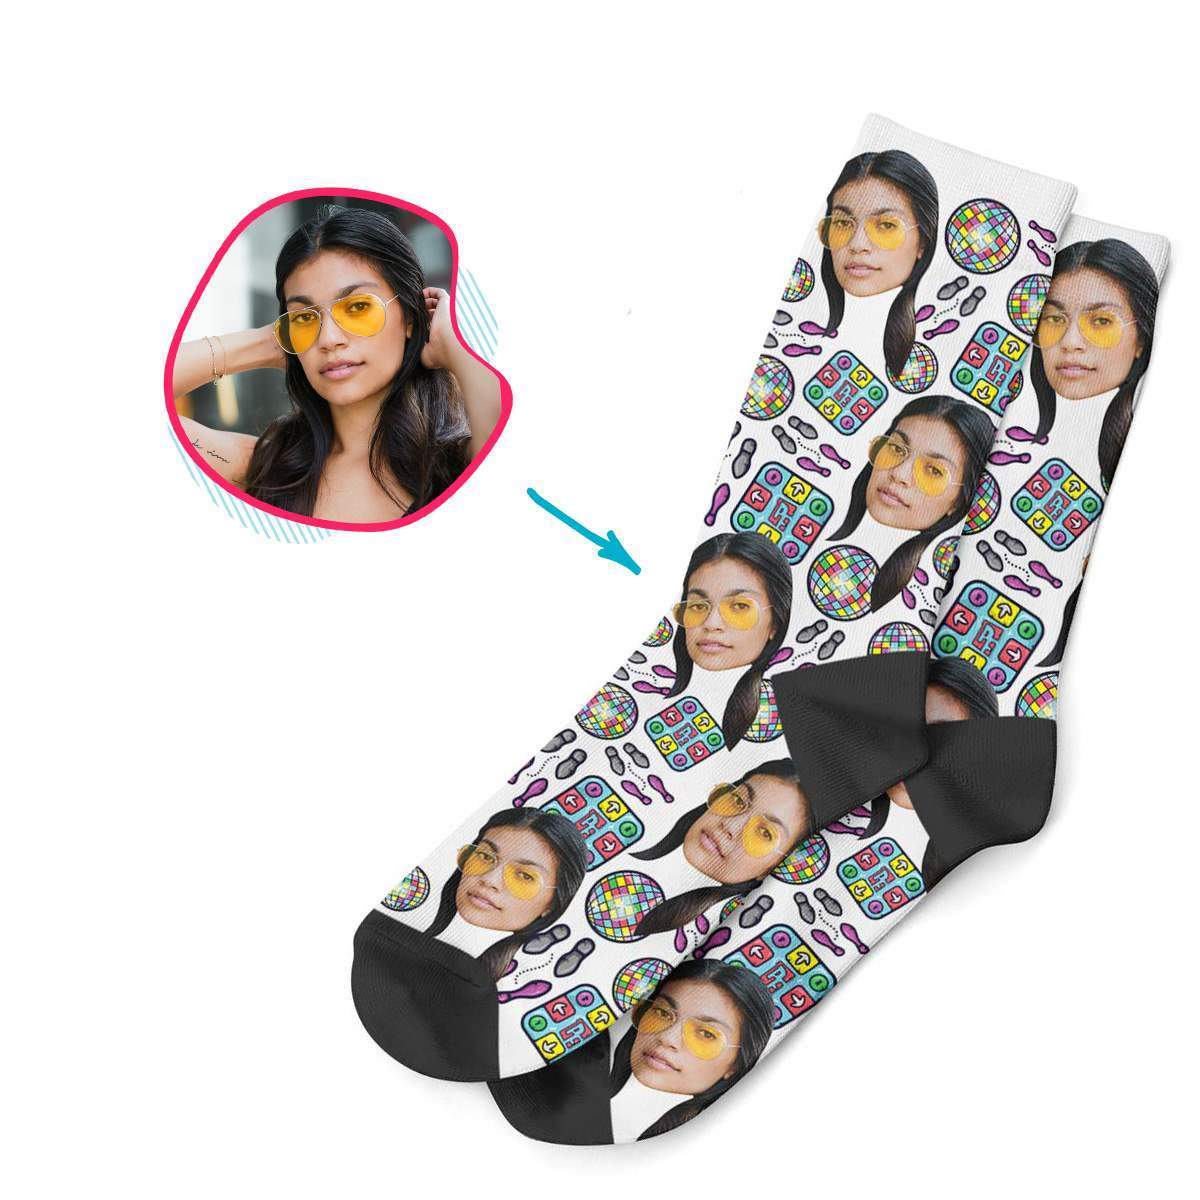 white Dancing socks personalized with photo of face printed on them